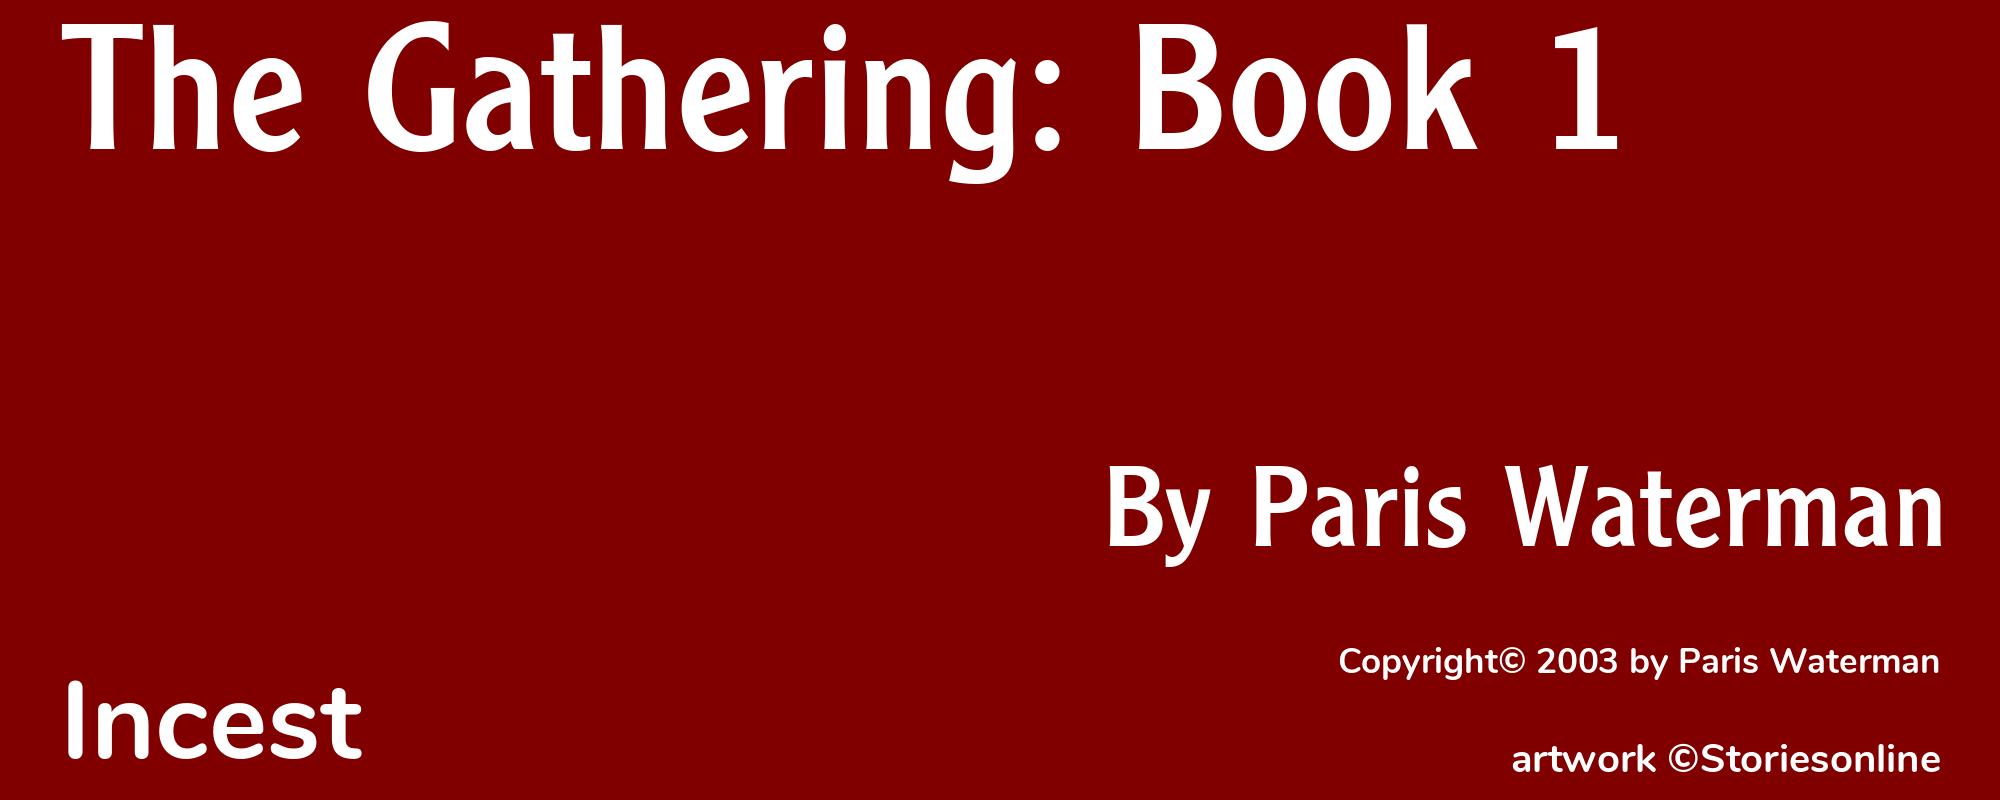 The Gathering: Book 1 - Cover